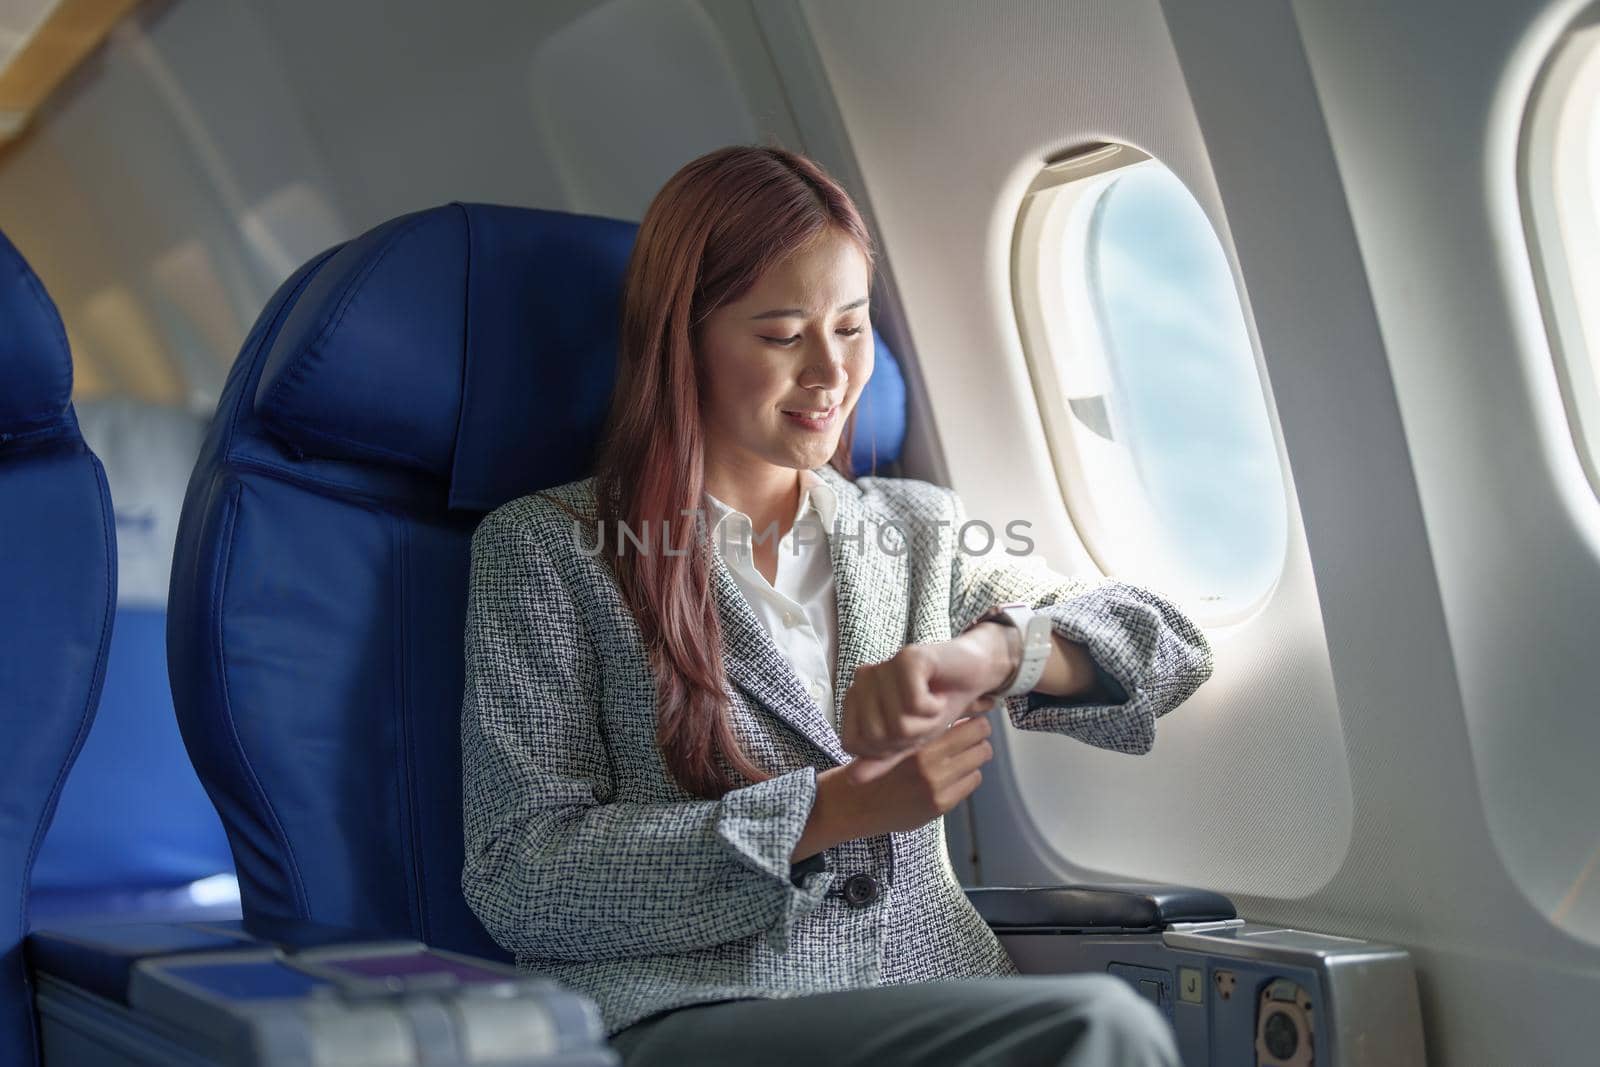 Portrait of a smiling Asian businesswoman looking at the time on the plane.